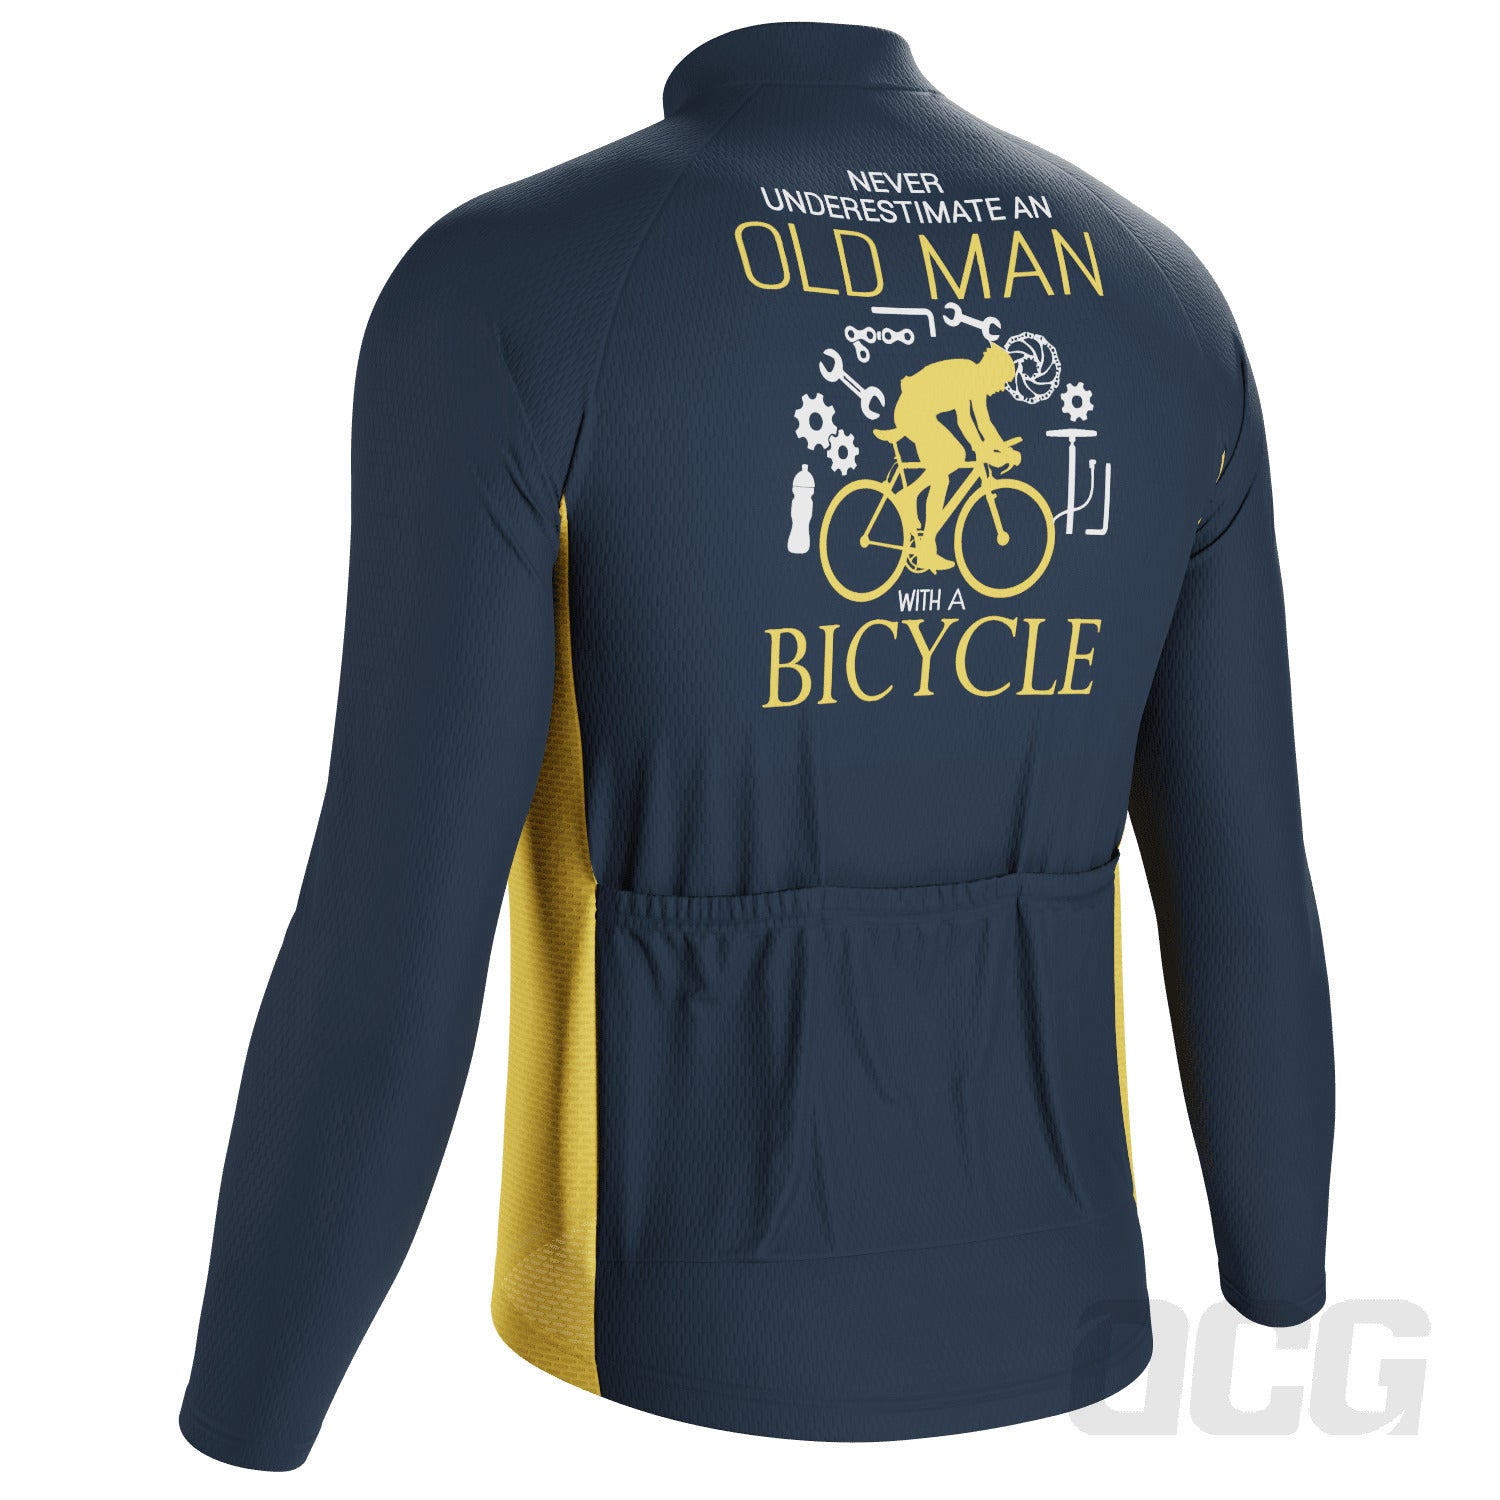 Men's Old Man Bicycle Long Sleeve Cycling Jersey